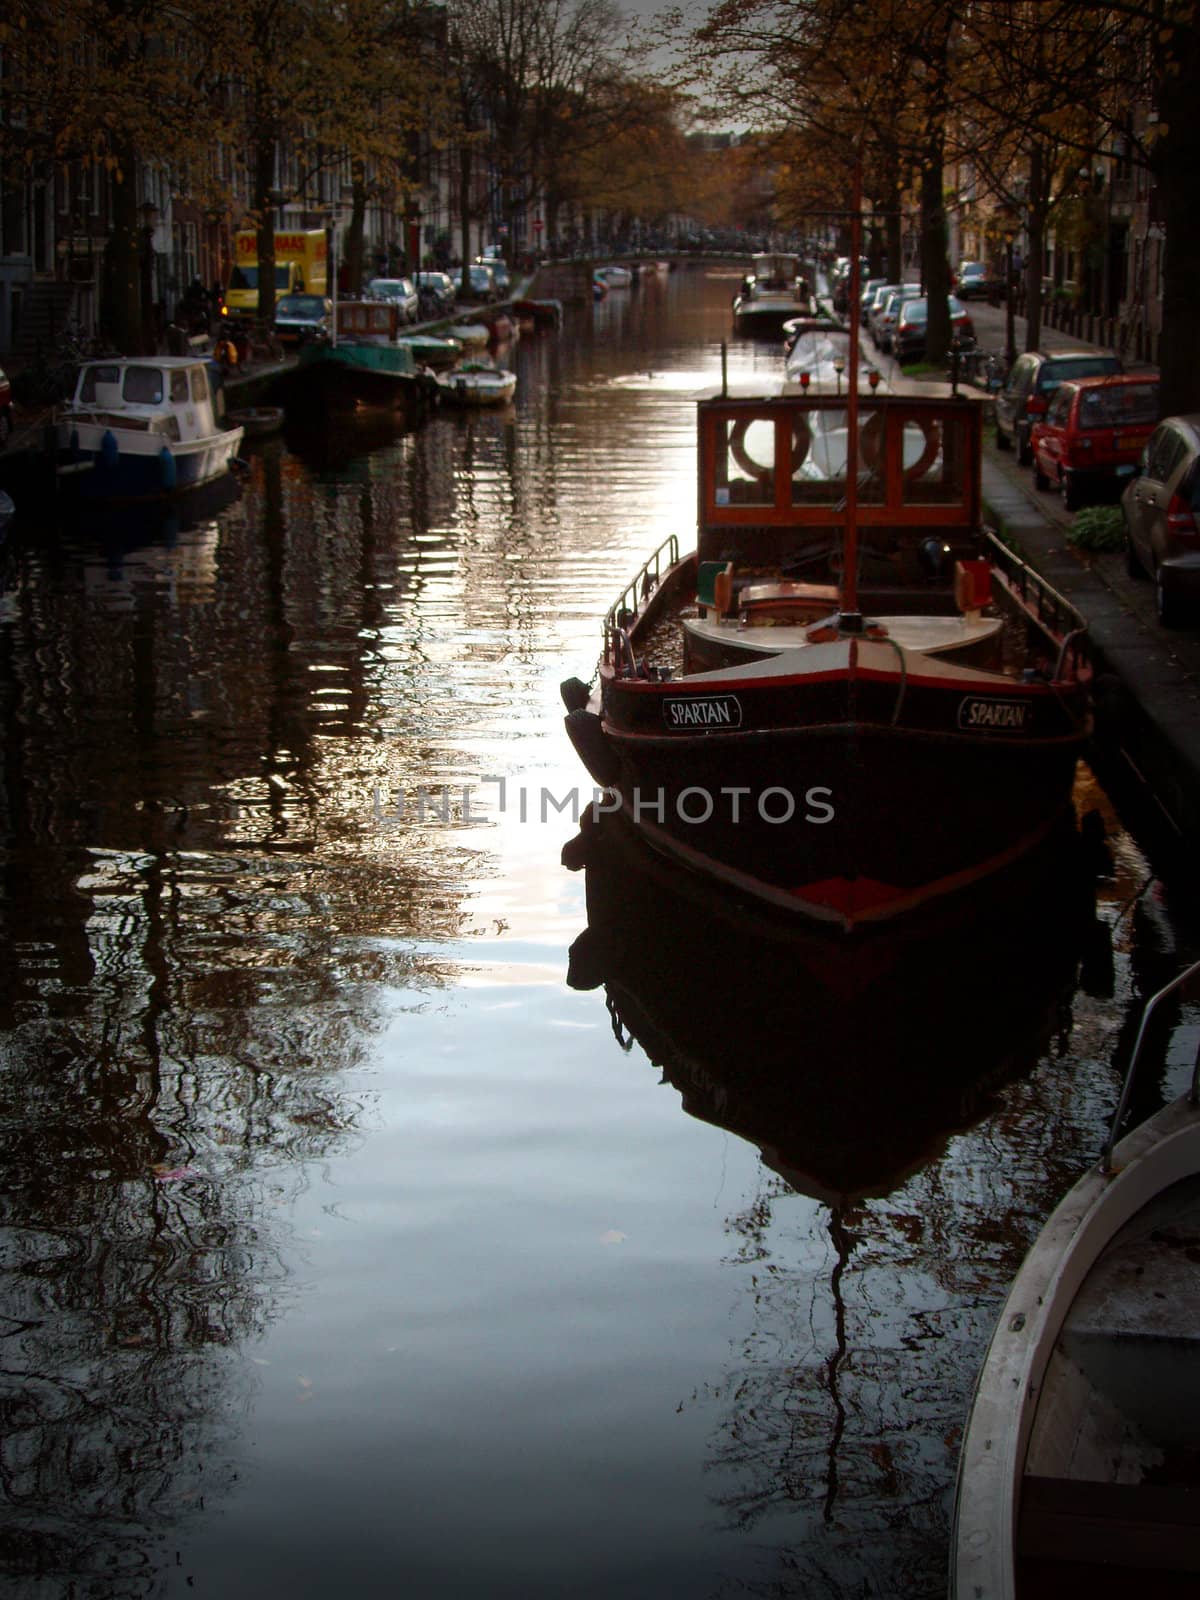 Boat docked on canal in Amsterdam with other docked vessels in the background area of the image.